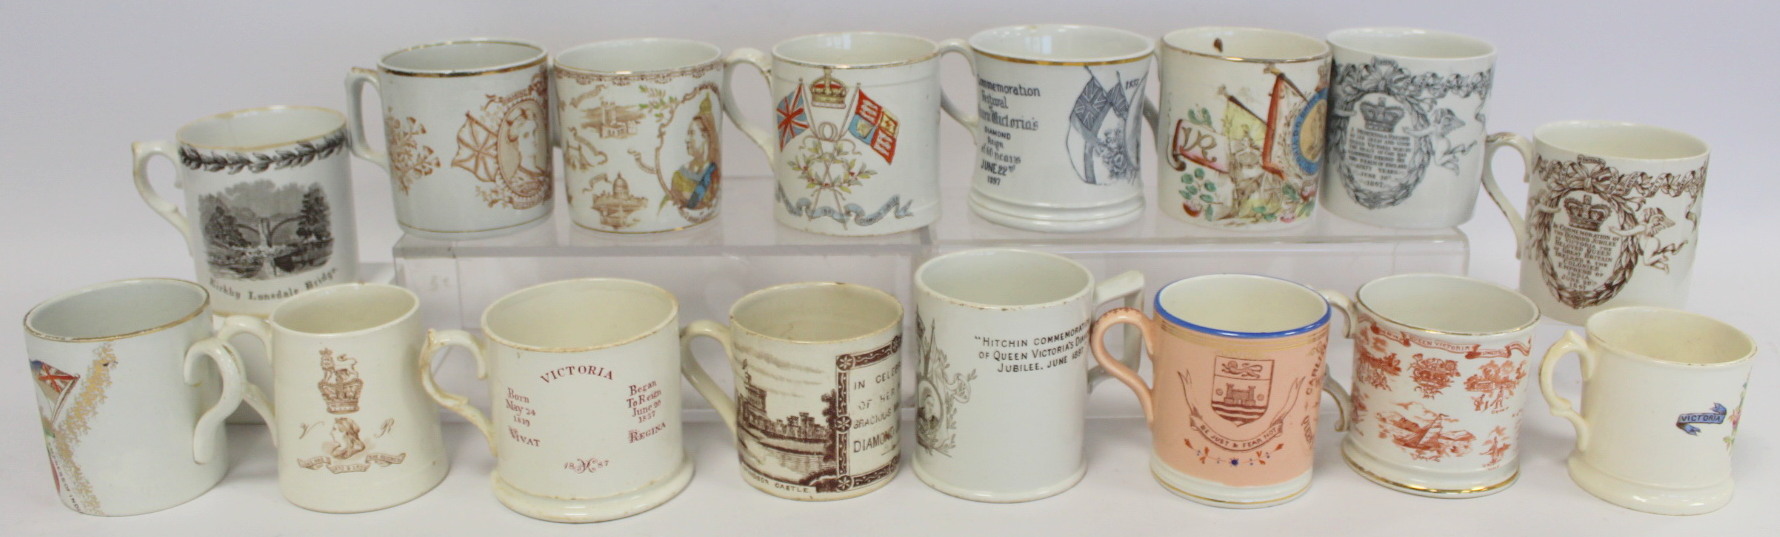 Collection of sixteen commemorative mugs for the Jubilees of Queen Victoria 1887 and 1897, including - Image 2 of 5